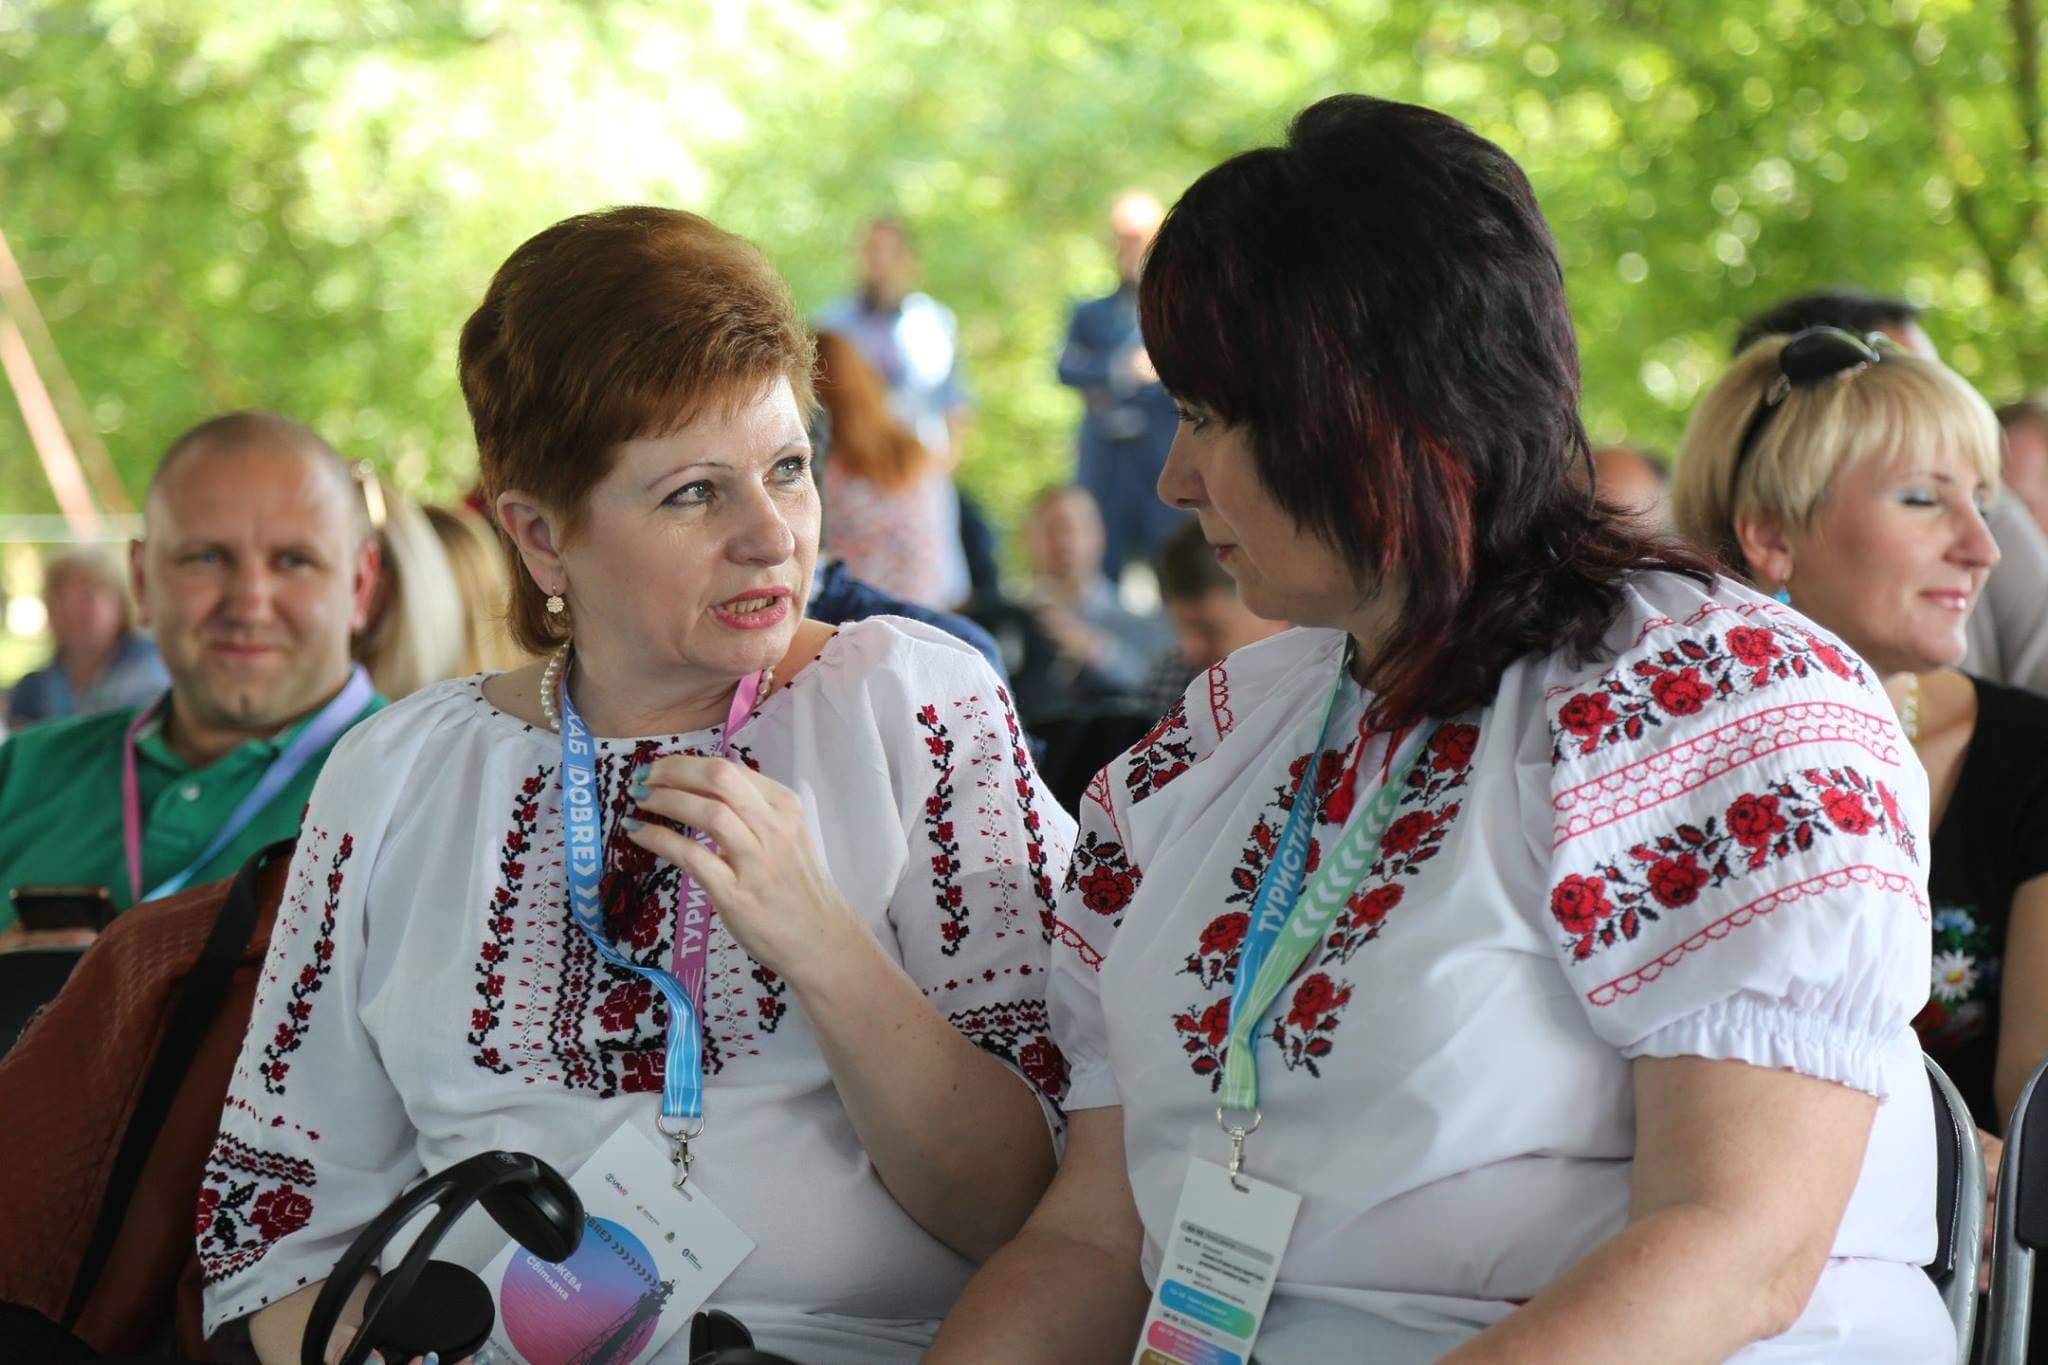 Starting tourist hub for United communities. Hub has gathered 300 participants from seven areas of Ukraine. To the participants of the event program USAID Ukraine-USAID UKRAÍ̈NA #DOBRE with vítalʹnim word contacted Ivanna Klympush-Tsintsadze, Vice-Prime Minister of European and êvroatlantičnoí̈ integration of Ukraine, Suzan Fritz, Director Regional Mission of usaid in Ukraine, vasily polujko, Deputy Minister of ecology and natural resources of Ukraine, Evgeny Riŝuk, deputy head of hersonsʹkoí̈ mandate state administration, Ivan Liptuga, adviser to the first vice-Prime Minister - Minister of economic development and trade of Ukraine, President of the national turističnoí̈ organization of Ukraine.
" decentralization gives opportunities but she sees and responsibility. Rozvivaûči Tourism can look at yourself from the side. See as good and bad. If we want to see starkov, we don't have a litter in front of their houses. Mess gives a mess, order the same order. This way the community will take its subjective and gets their own face. Pure Stomp will look for the profitability of the restaurant, and the tax evasion will provide wellbeing. It works at the community level and has an immediate impact on the country in general ",-Zaznačila Joan Klimpuš-Cincadze.
" Ukraine can have a lot to offer in the field of tourism. In this territory, many outstanding attractions are worth seeing. And it is only an external manifestation of the potential that has ukrainian tourism. You have to approach the development of tourism services to encourage visitors and to spend tourist costs in your gromadah ",-Zaznačila Suzan Fritz.
Ahead of 2 days of fruitful work